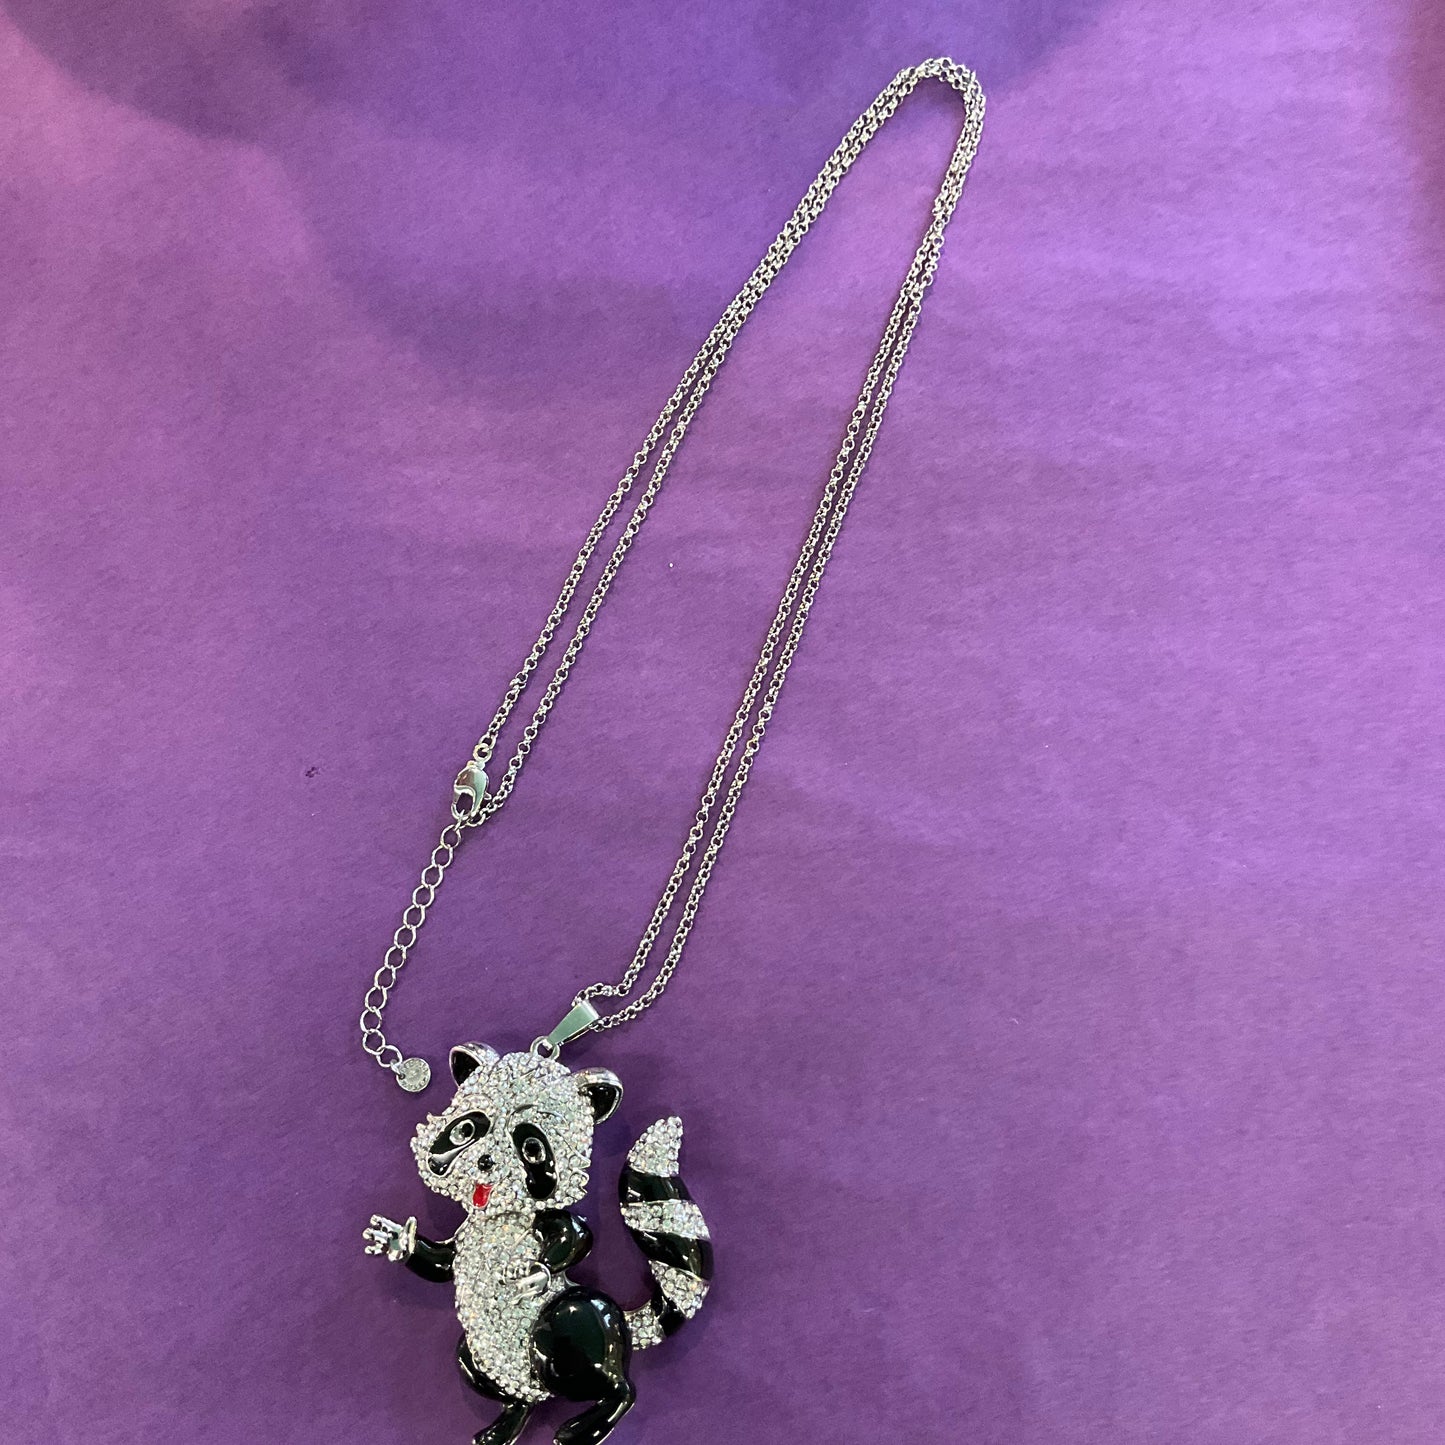 Vintage Quirky Butler and wilson oversized Rhinestone and enamel Raccoon pendant, signed. Gift for her